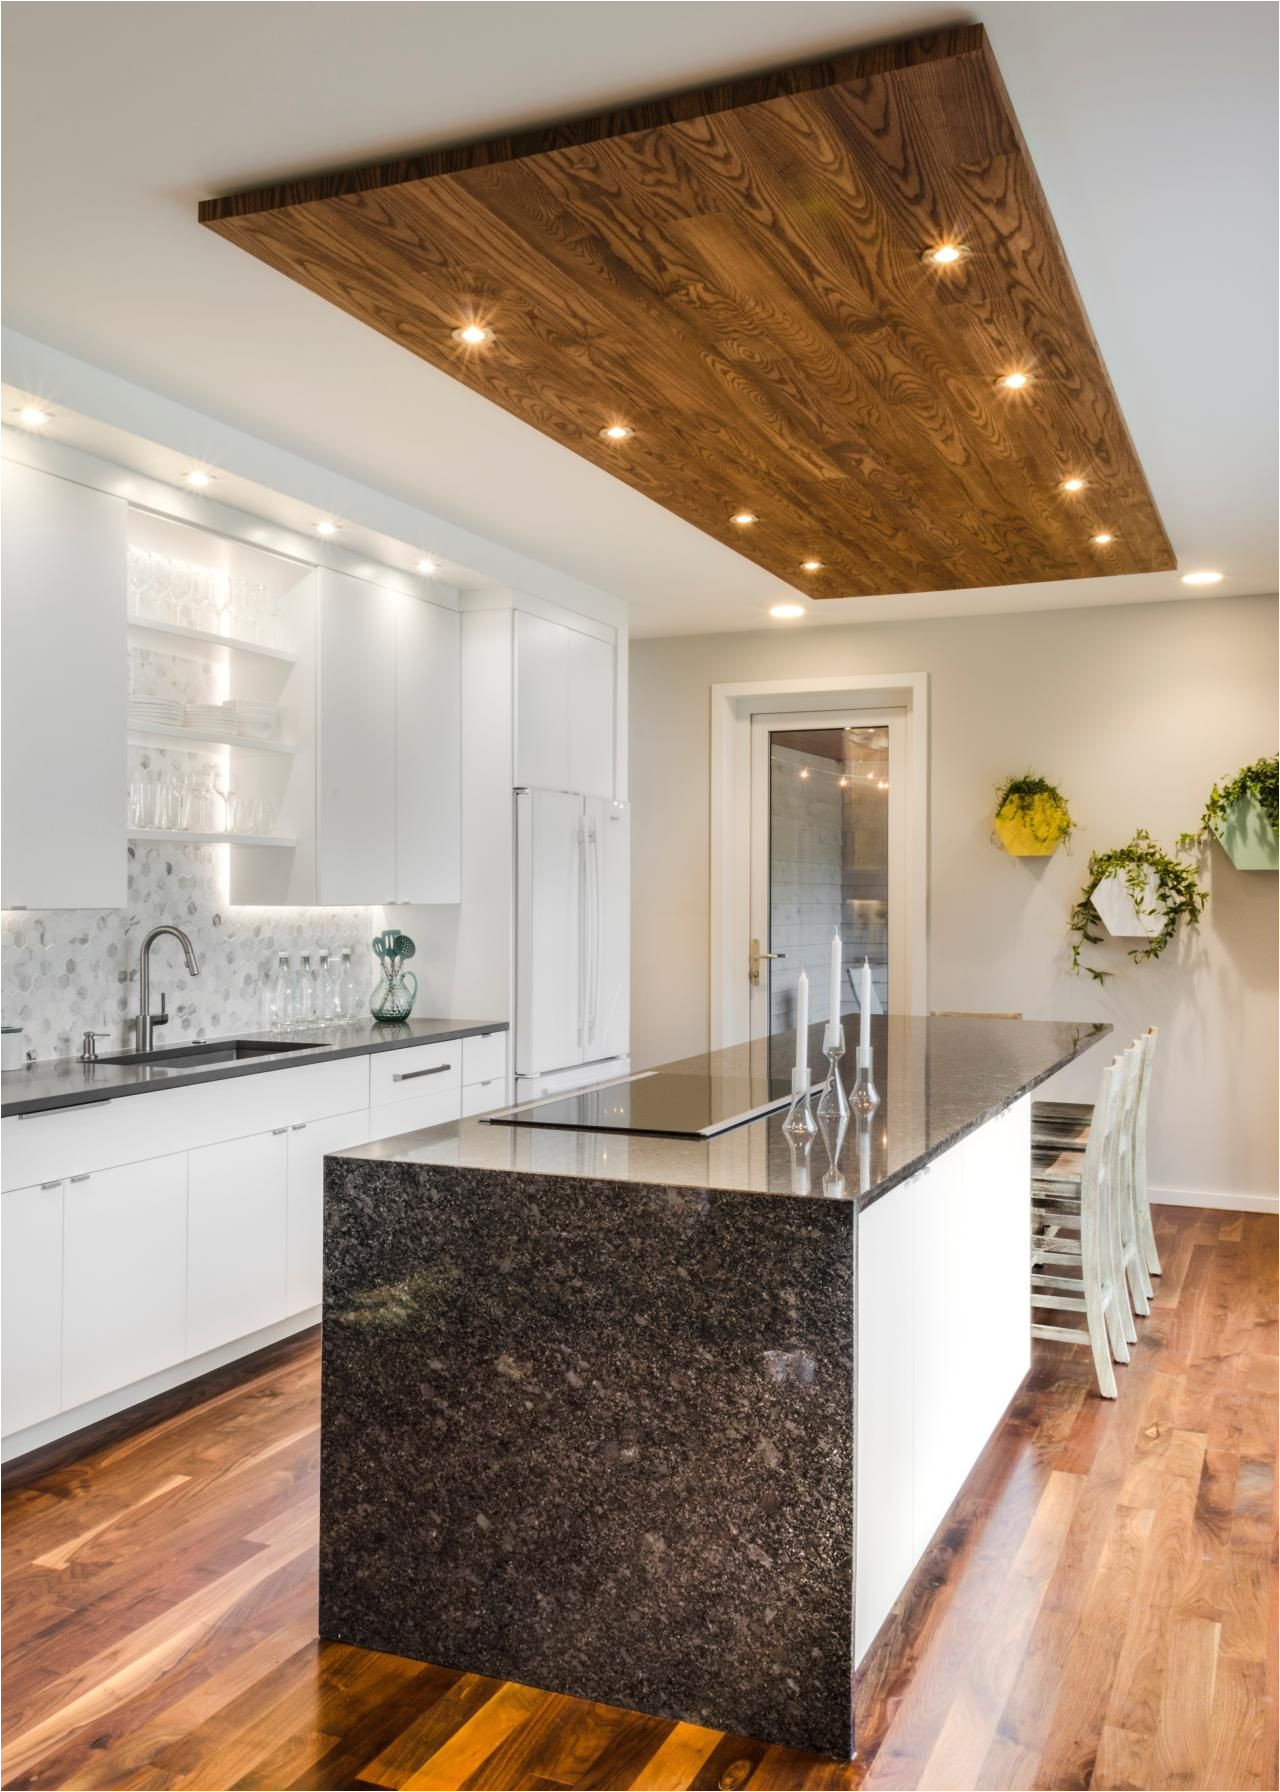 Ceiling Mounted Recessed Kitchen Vents White Kitchen with Feature Wood Ceiling Detail Above island with